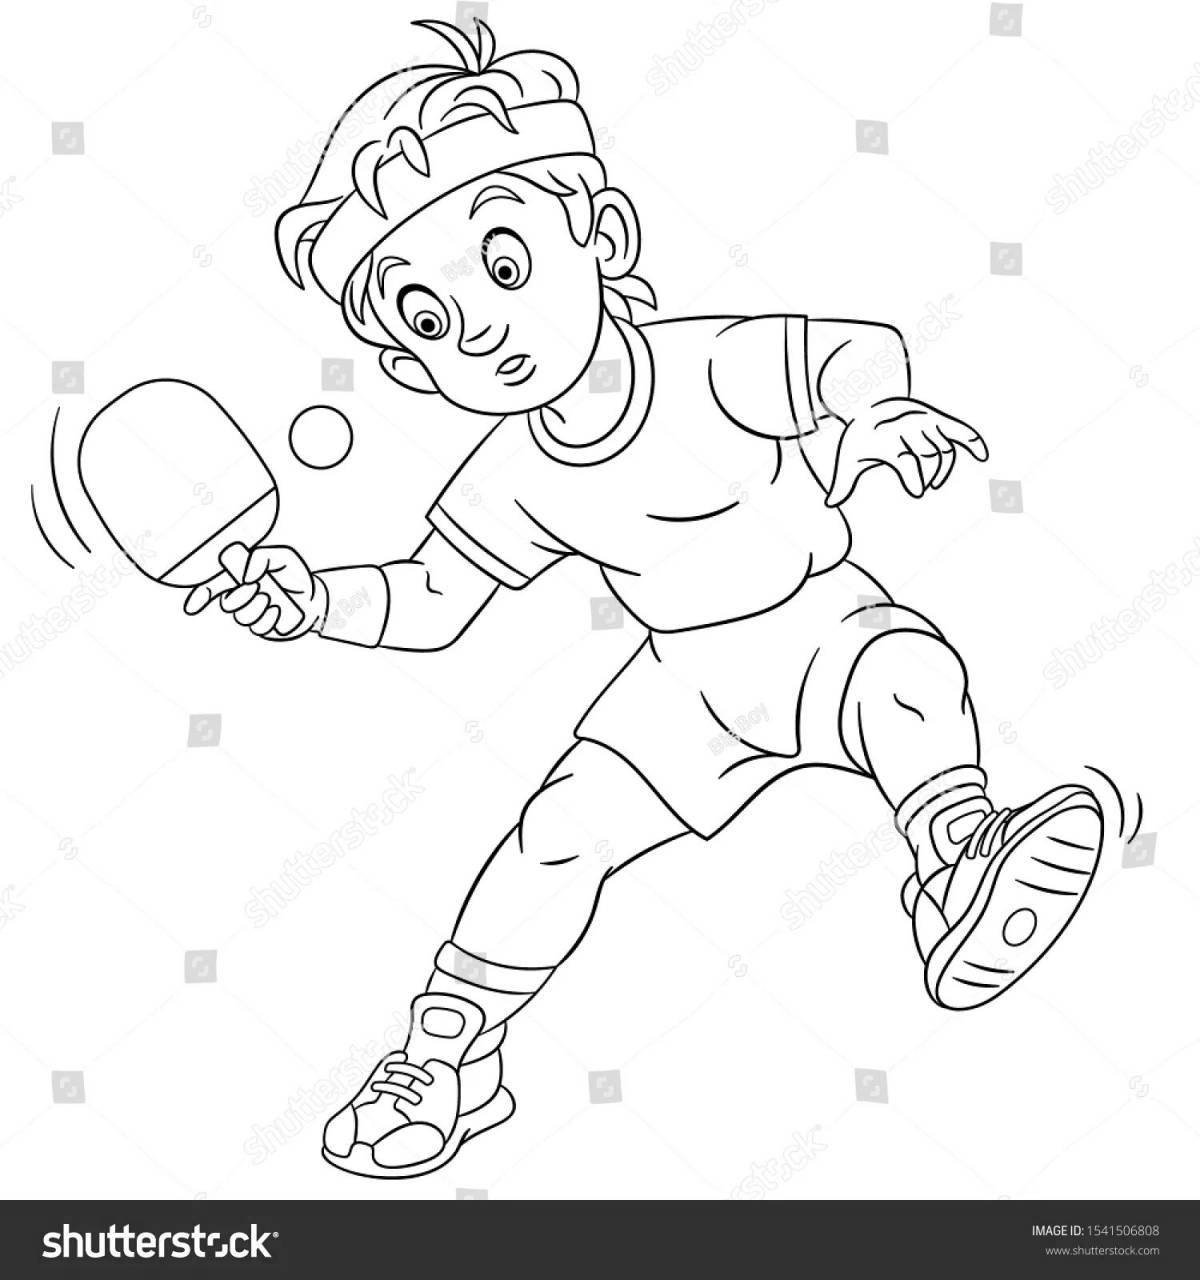 Adorable tennis coloring book for kids